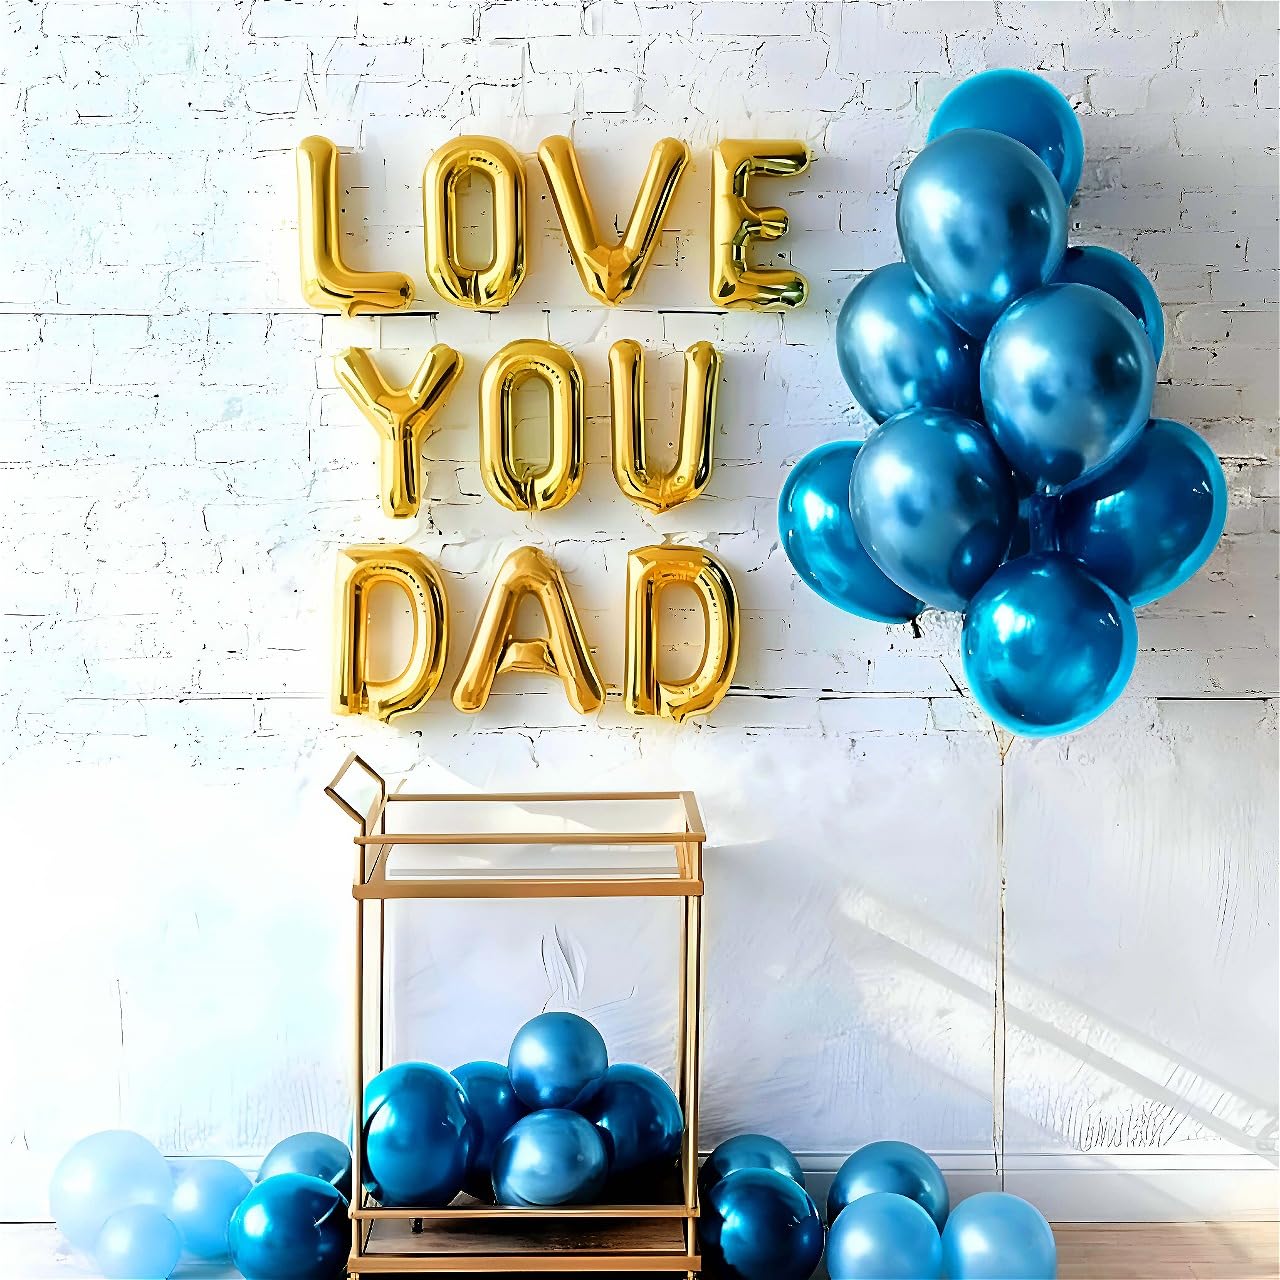 Make this Father's Day catchy with this decor kit